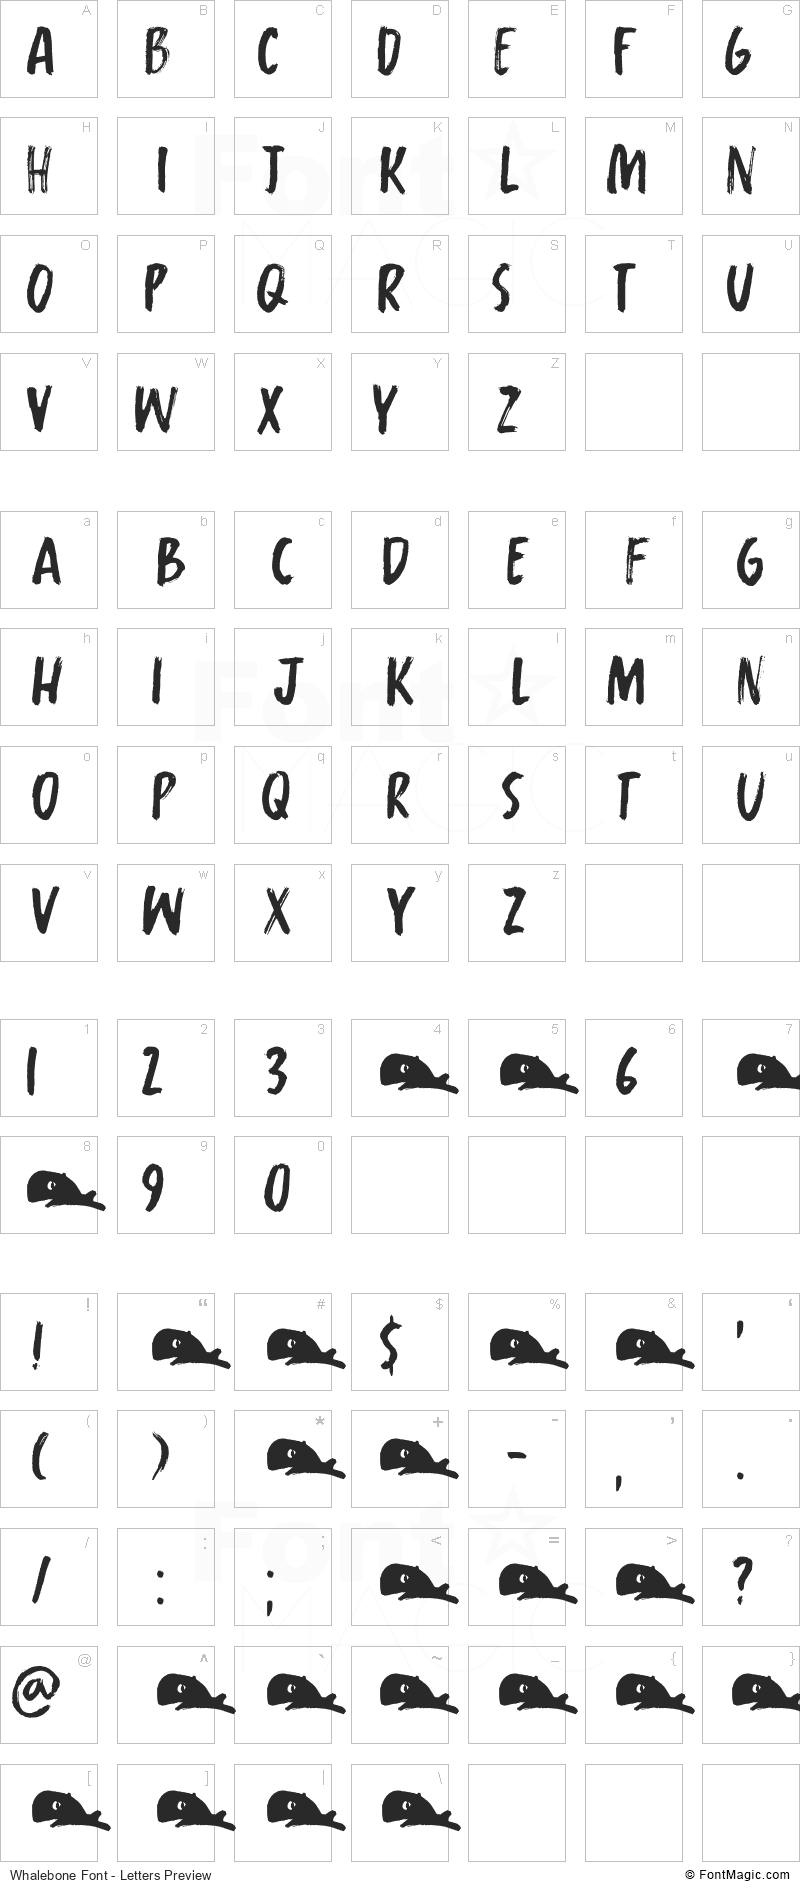 Whalebone Font - All Latters Preview Chart